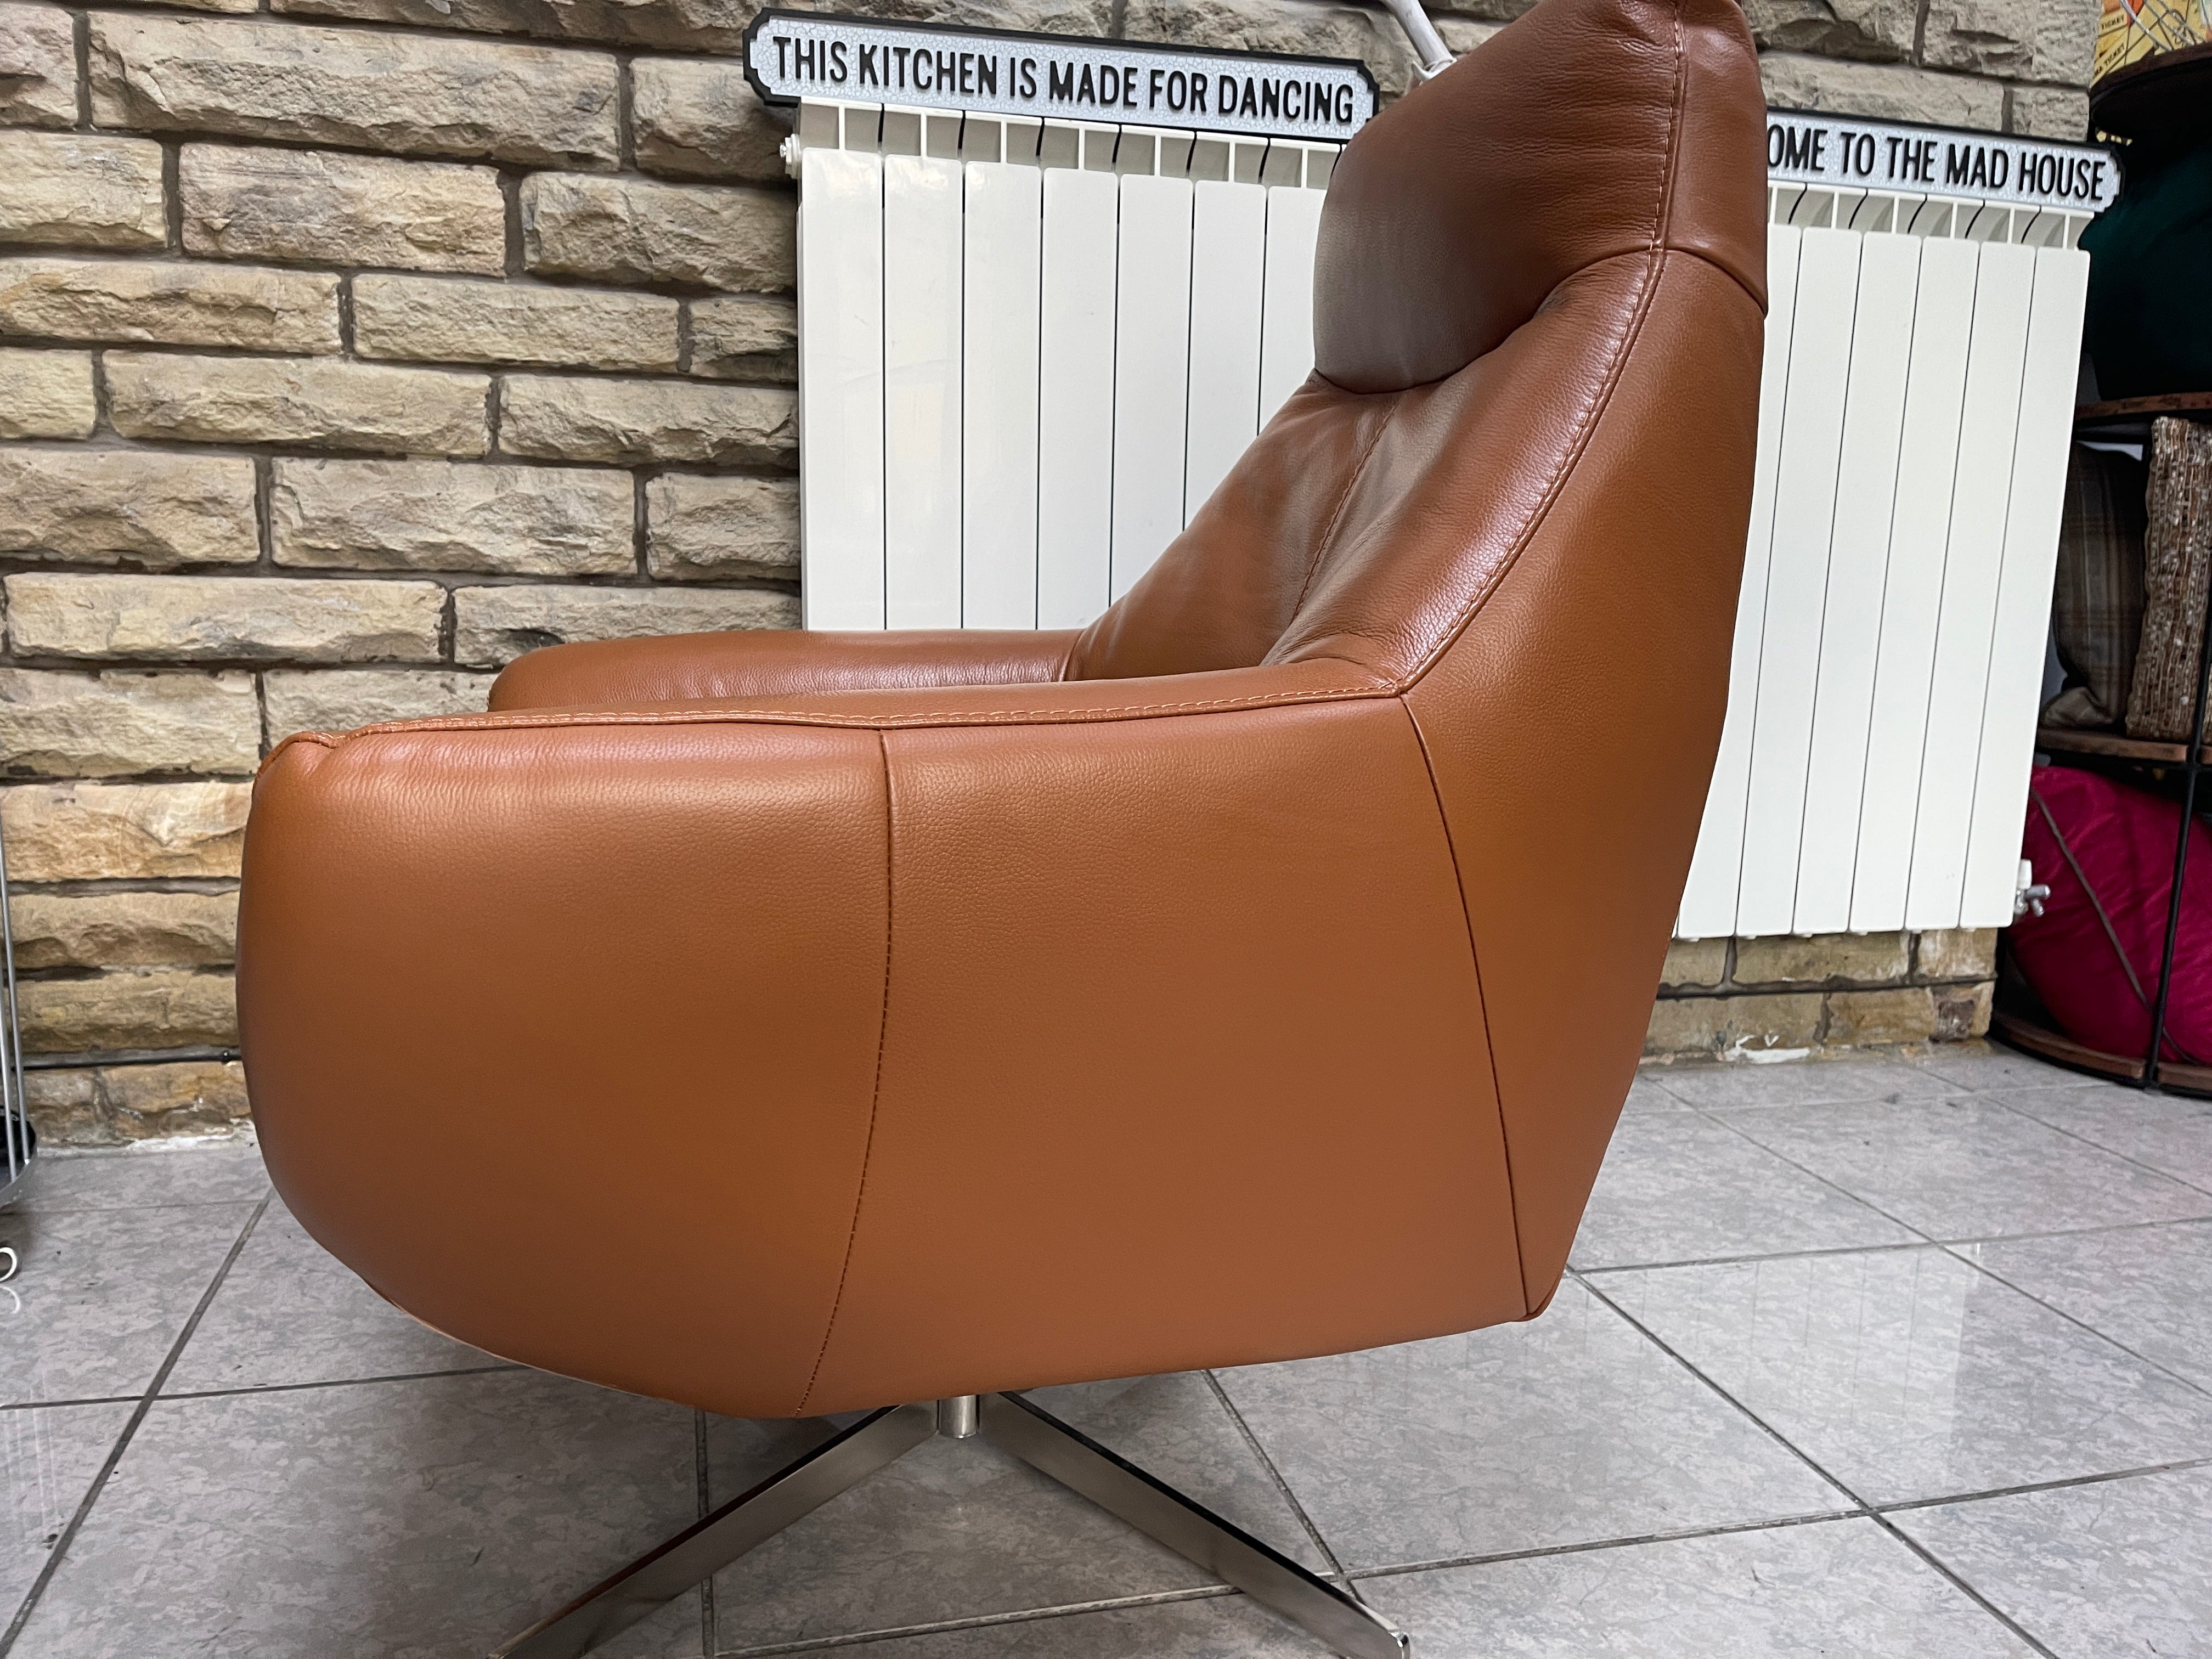 SOFOLOGY GALAXY padded swivel chair in toffee brown leather